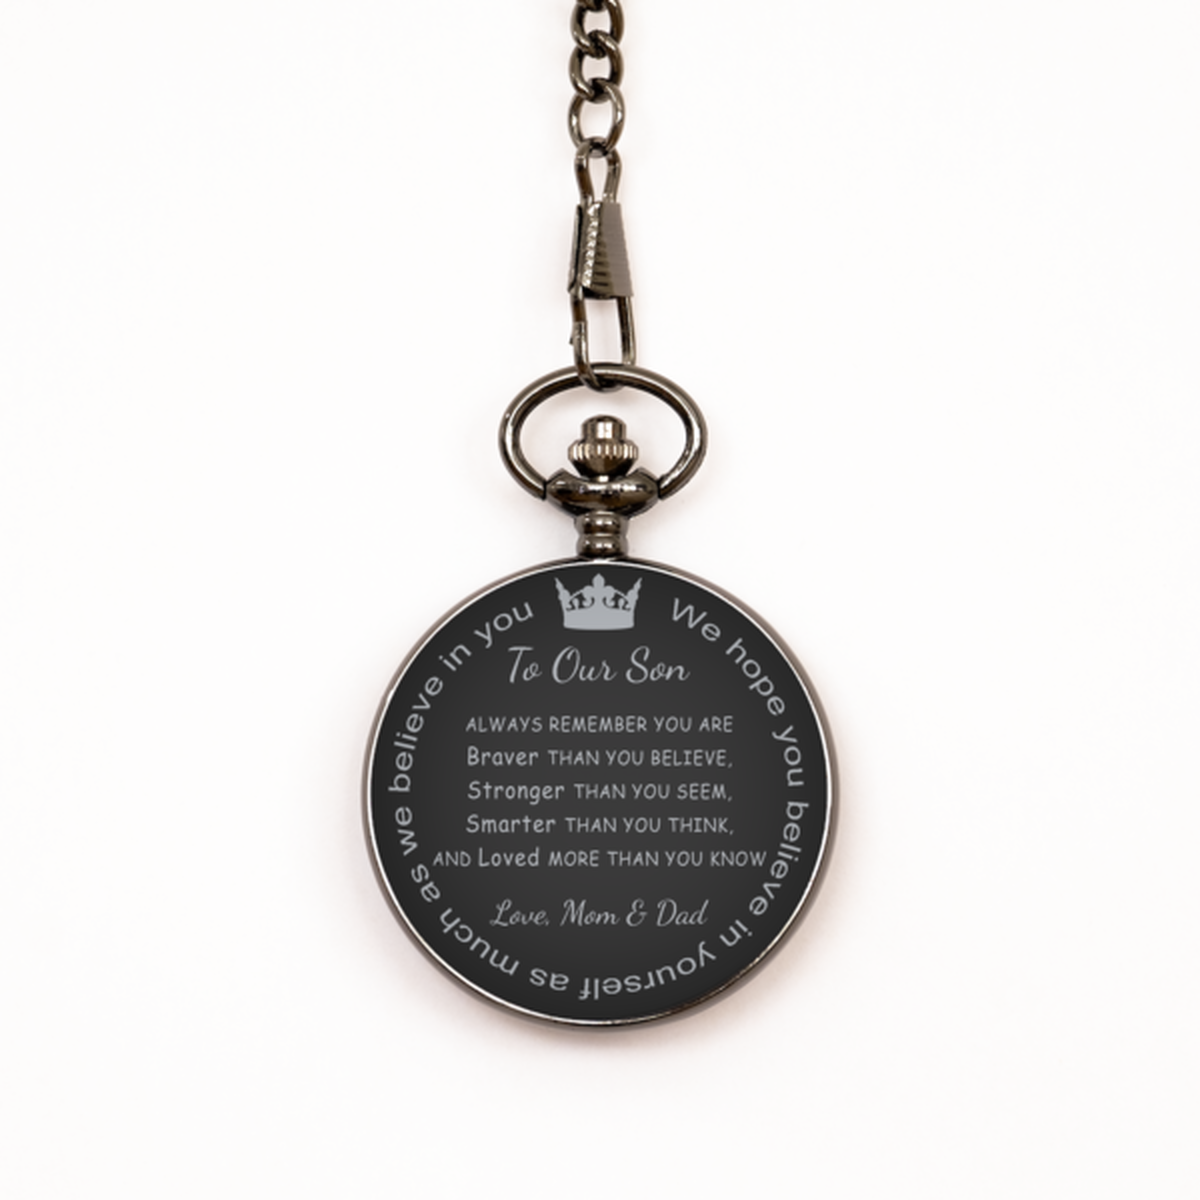 To My Son Pocket Watch from Mom and Dad, Gift for Son, Black Engraved Pocket Watch, You are Braver, Birthday, Christmas Gift.